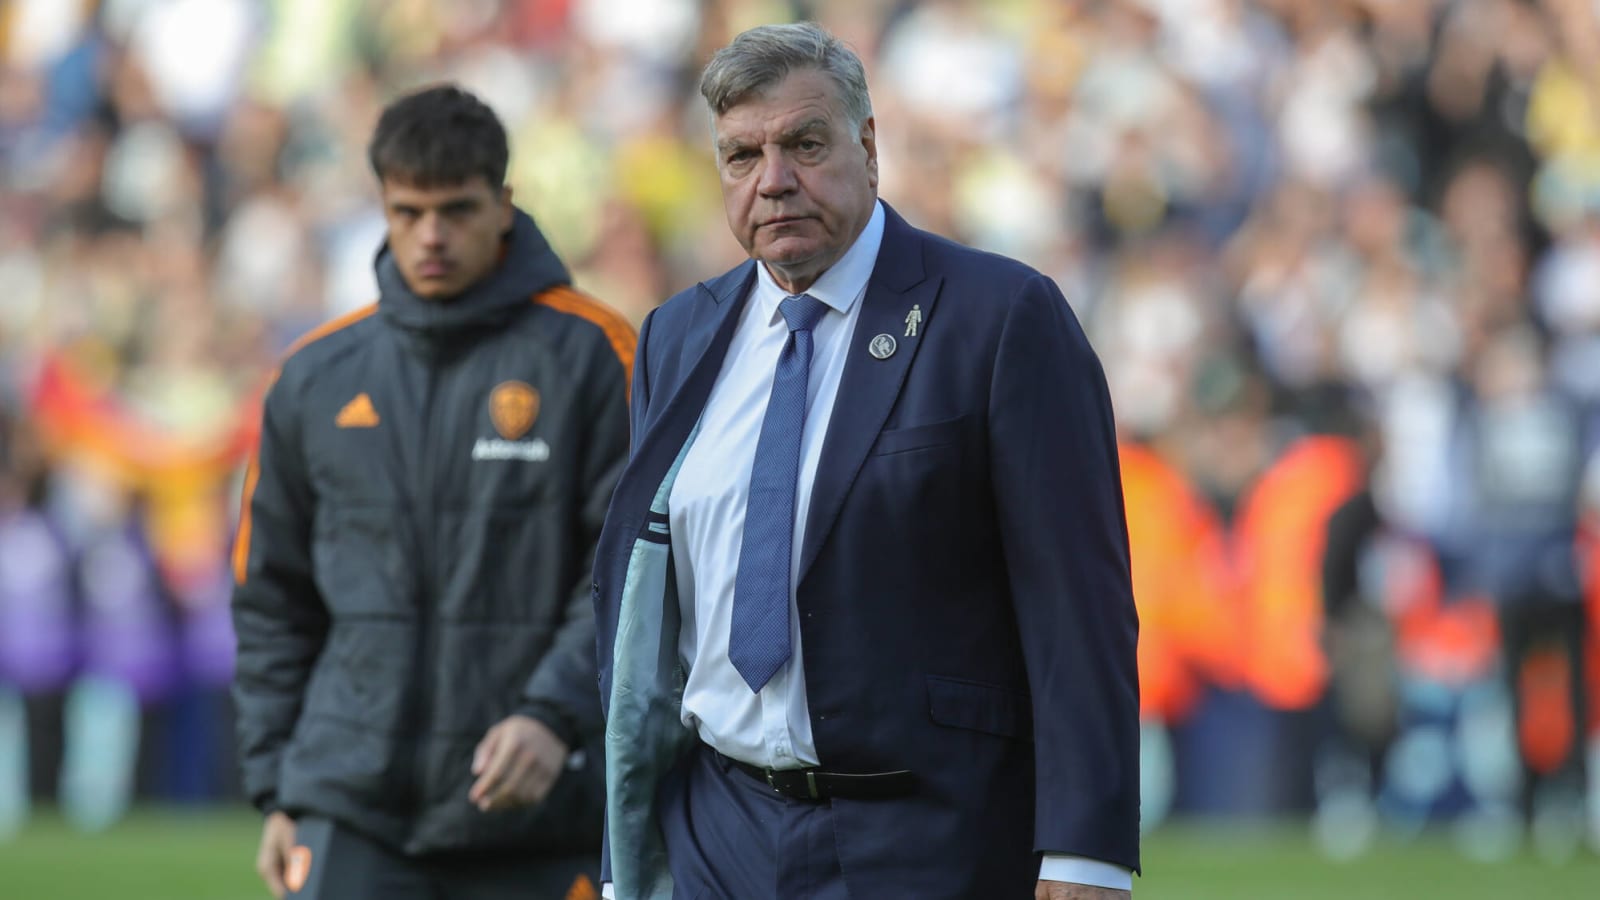 Final decision expected on Sam Allardyce as Leeds takeover talks continue